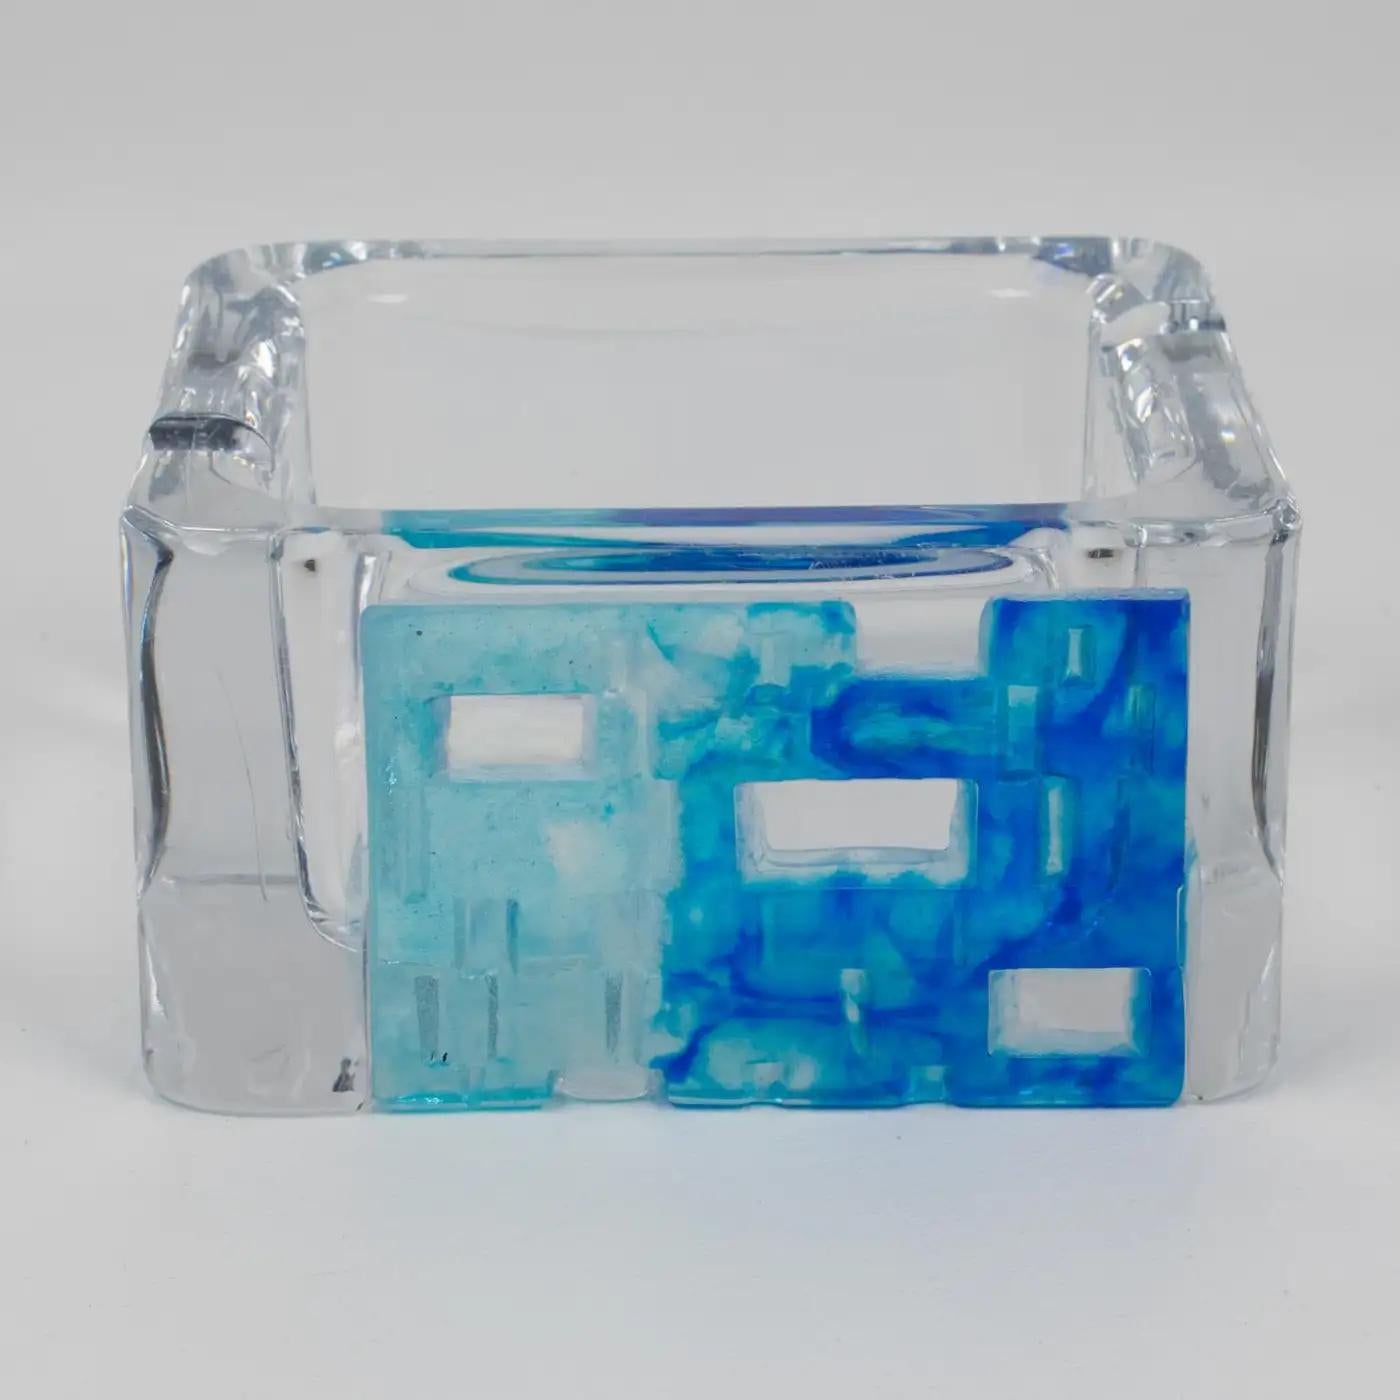 Daum Crystal and Blue Pate de Verre Ashtray Desk Tidy Bowl Catchall For Sale 3